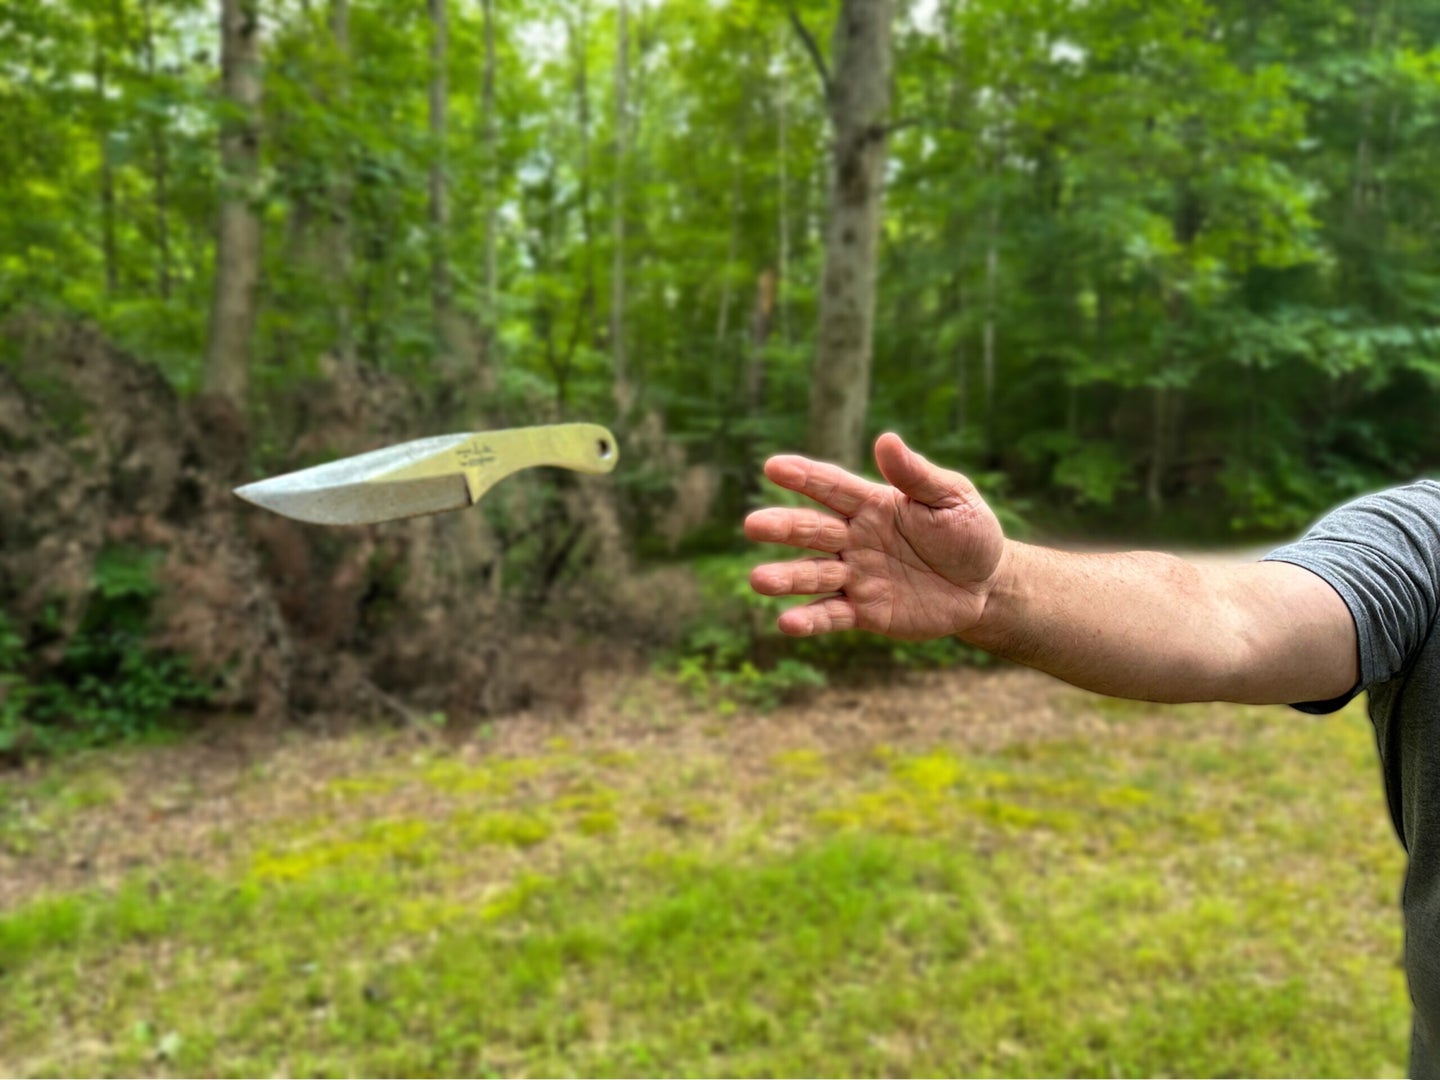 an expert shows how to knife throw.